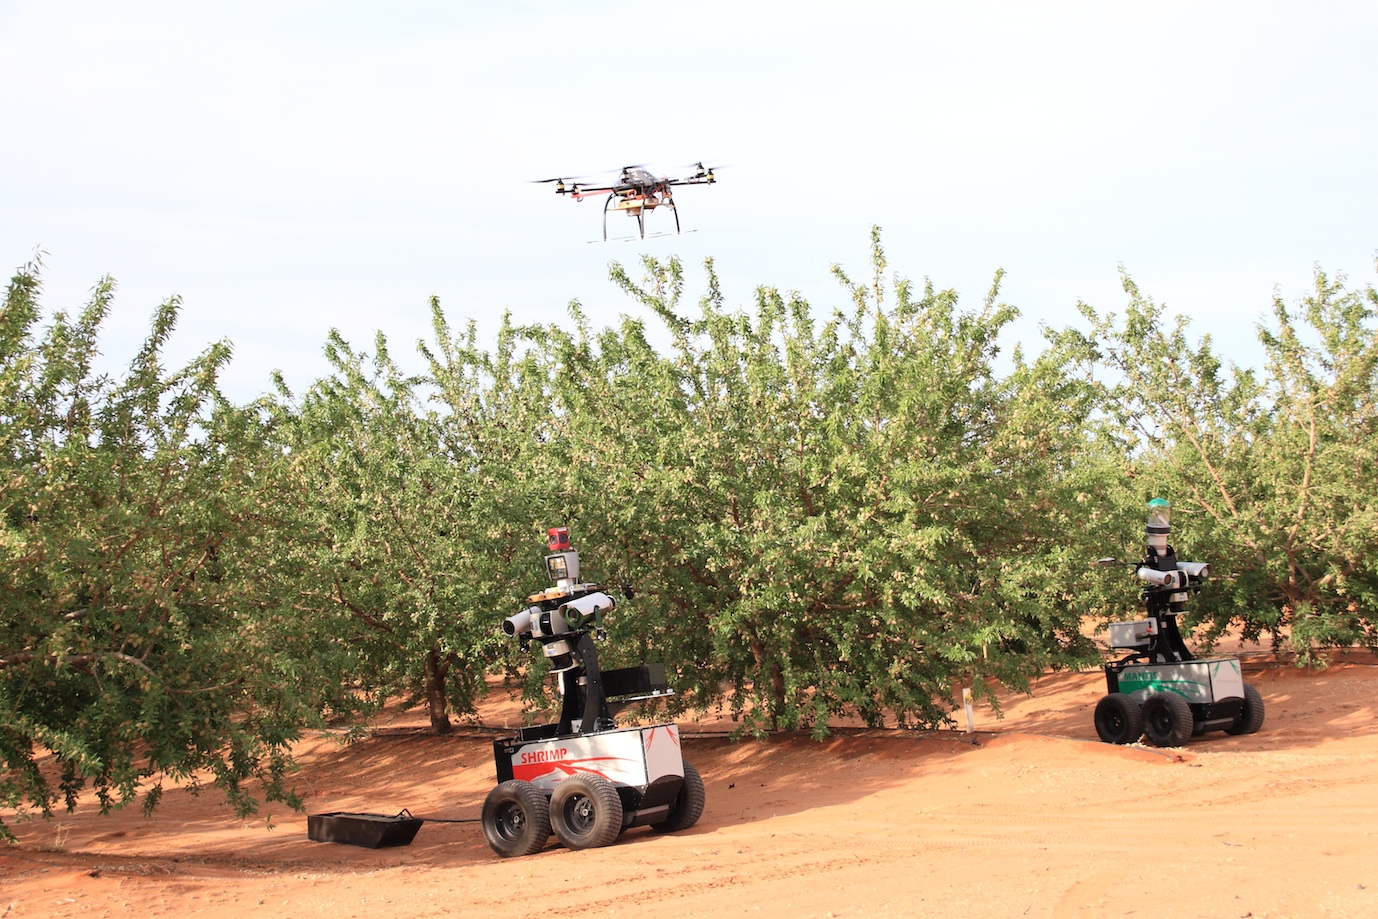 Tree crop with two robots on the ground in the field and one aerial robot flying over the field.